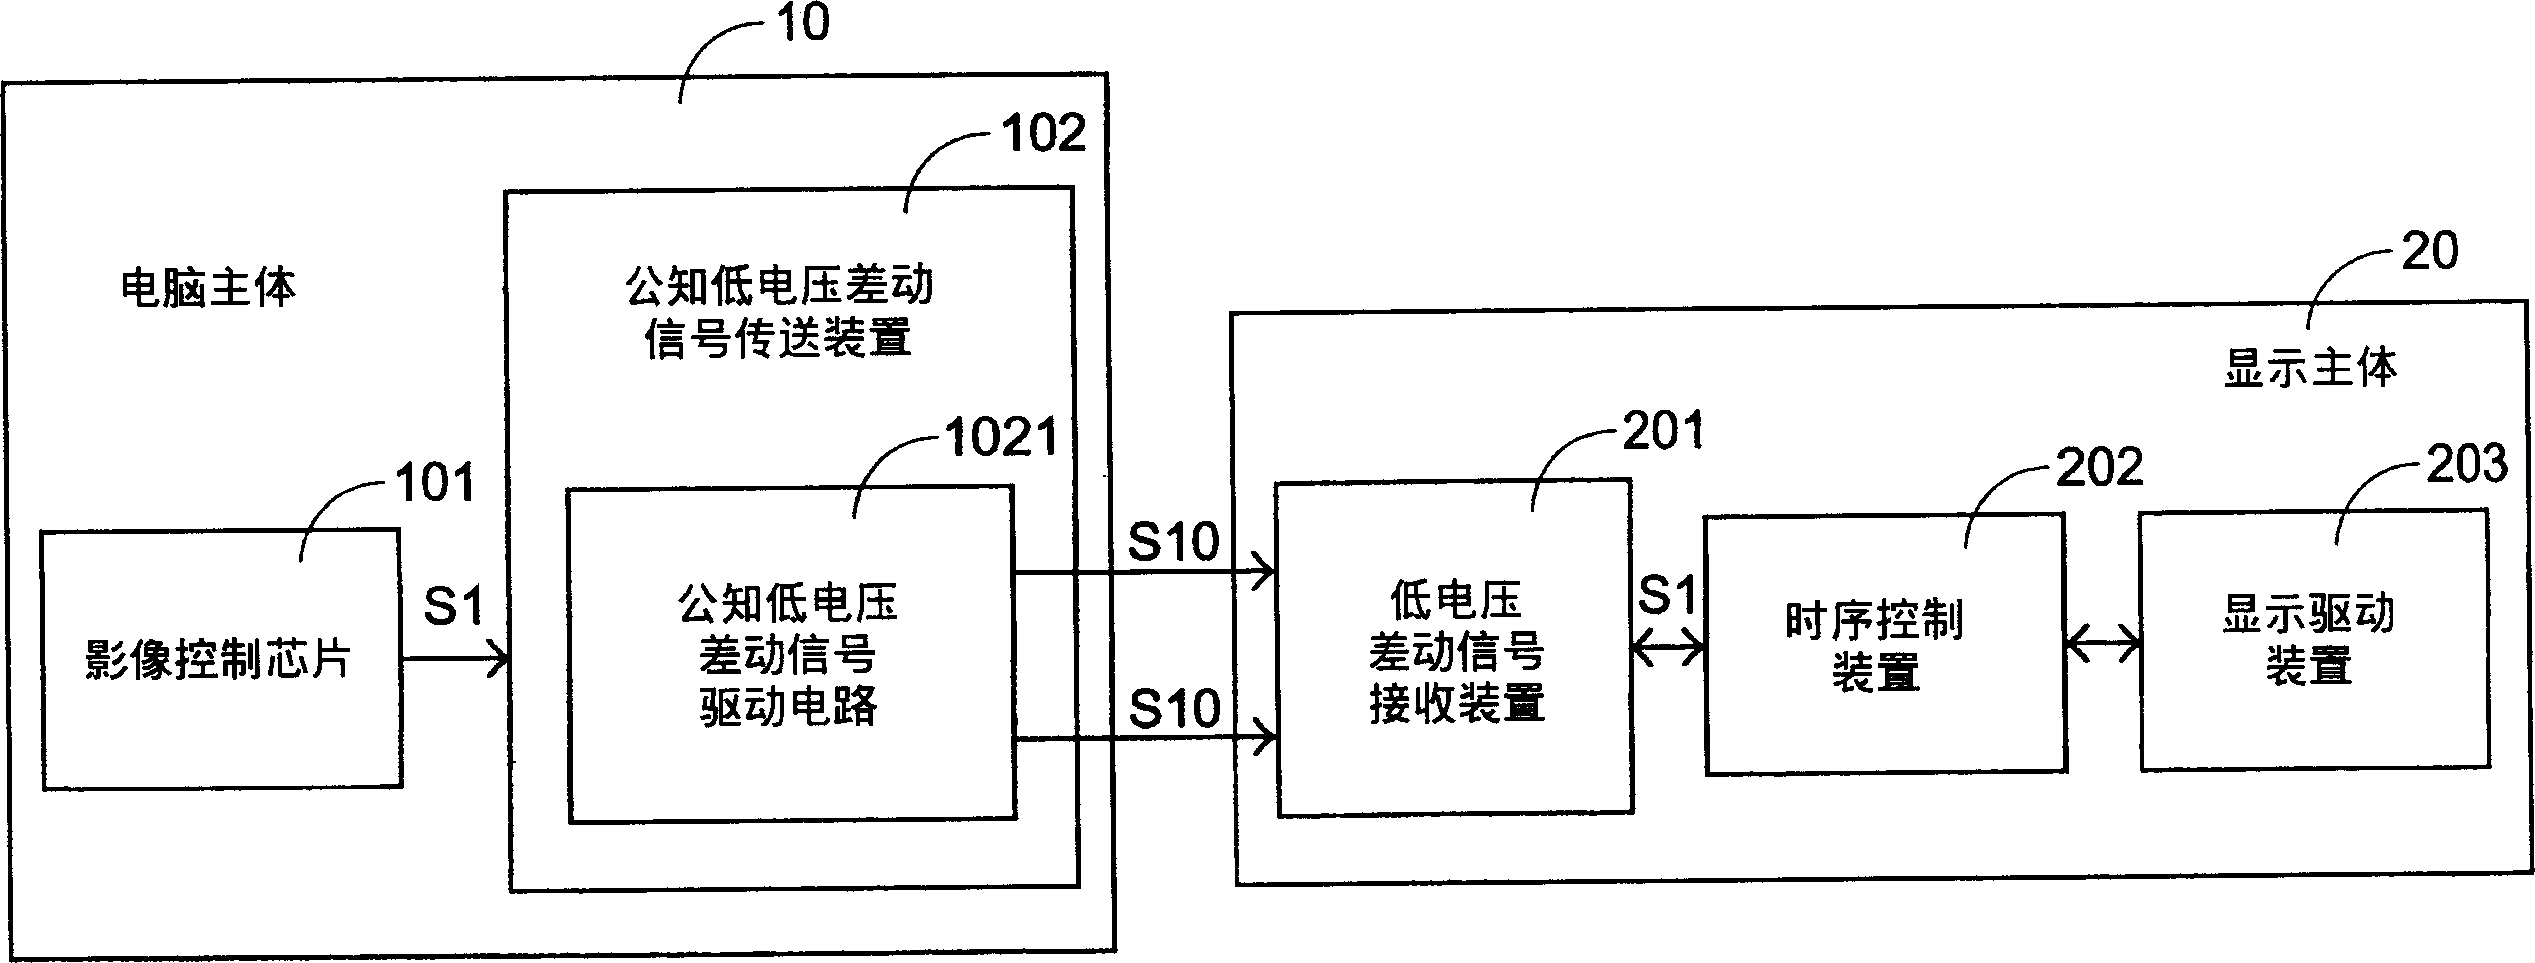 Low voltage differential signal transmission device